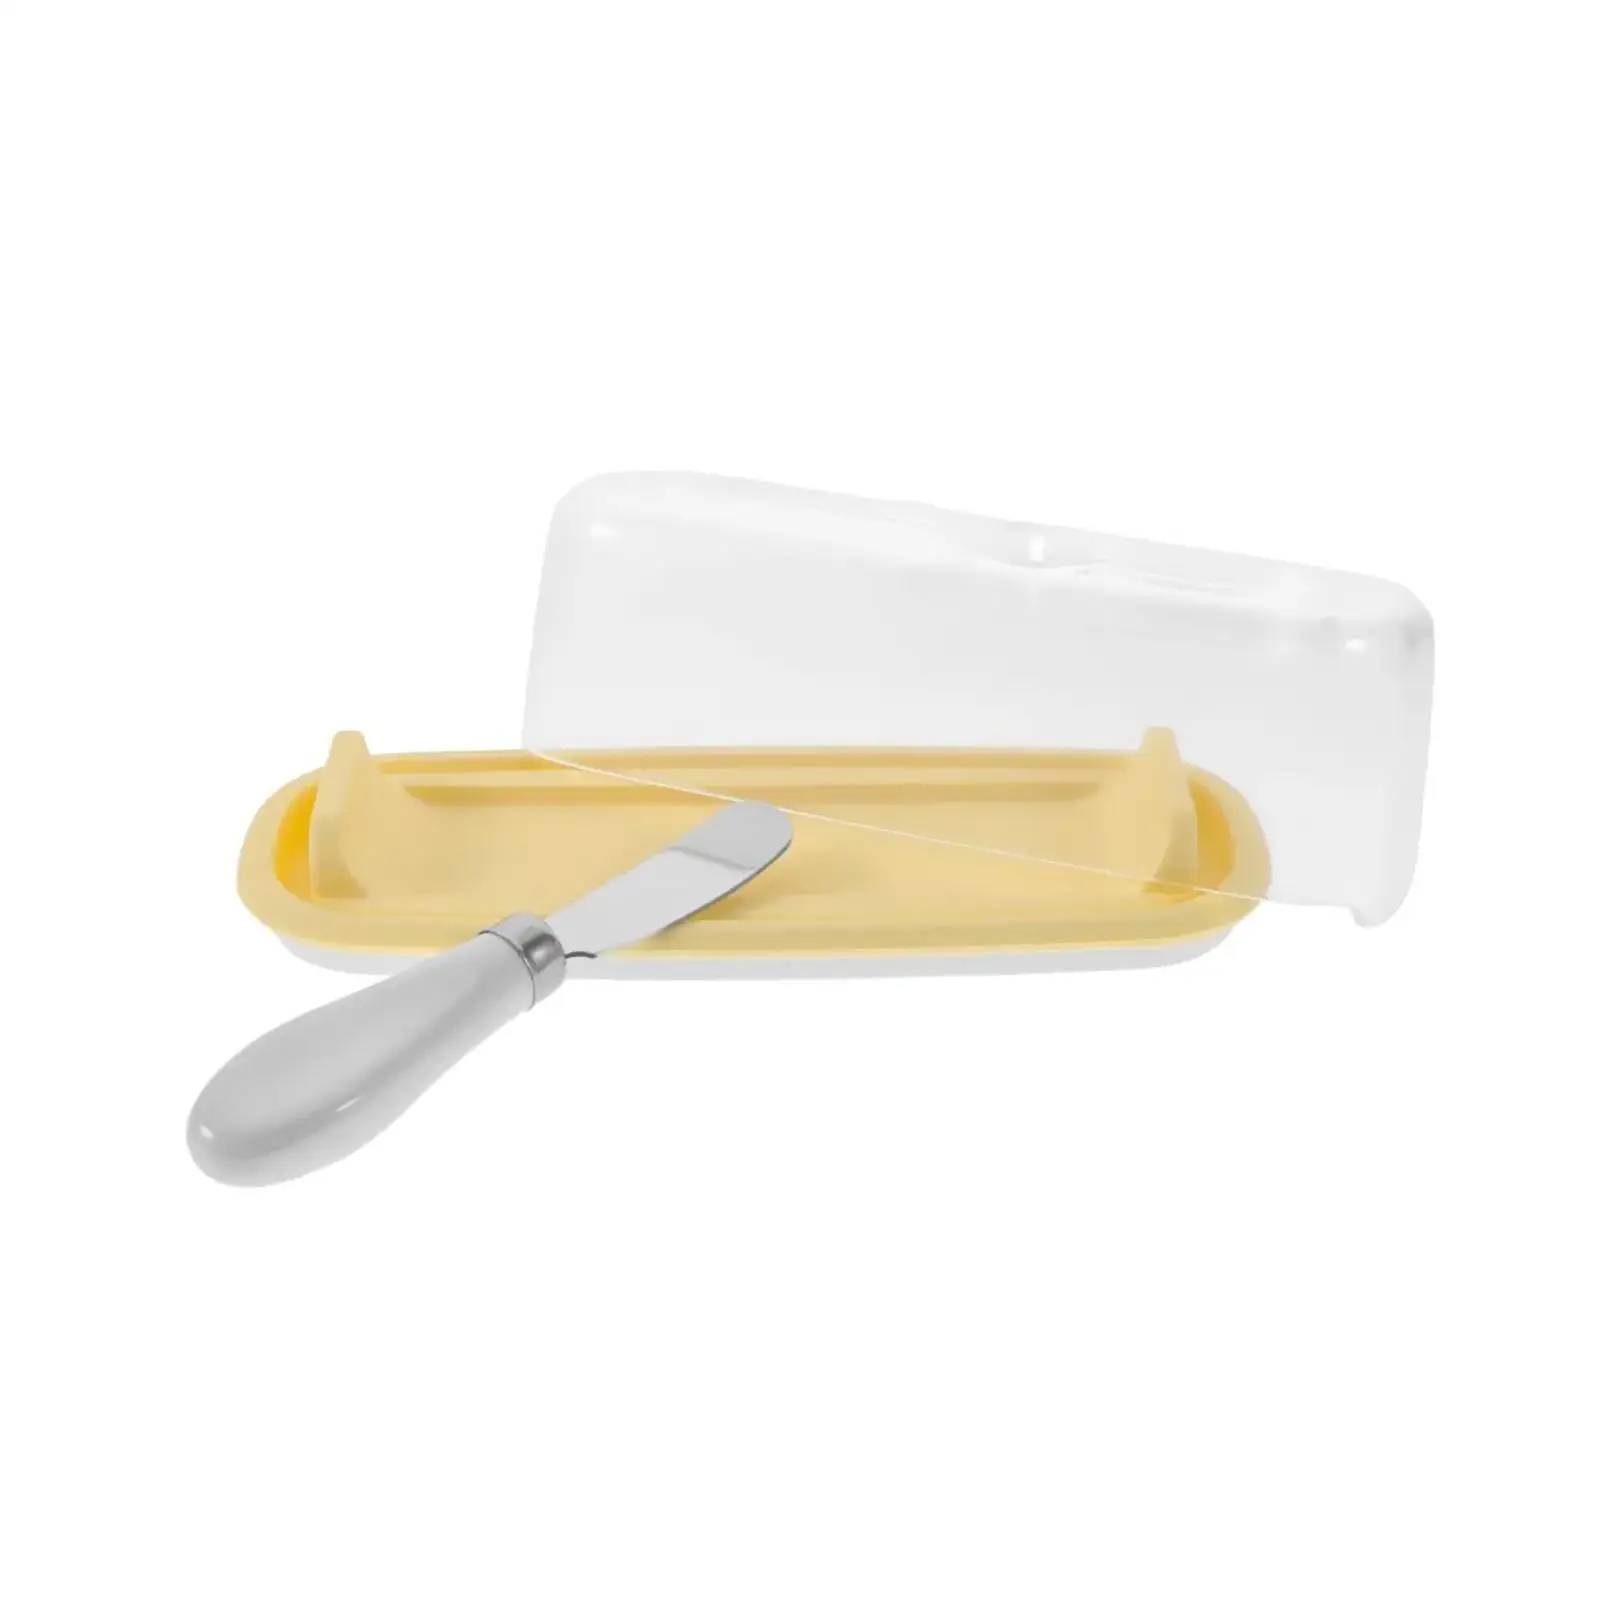 Butter Dish with Lid and Knife Easy Clean Dessert Trays Ramps Cheese Slicing Holder for Cupboard Restaurant Refrigerator